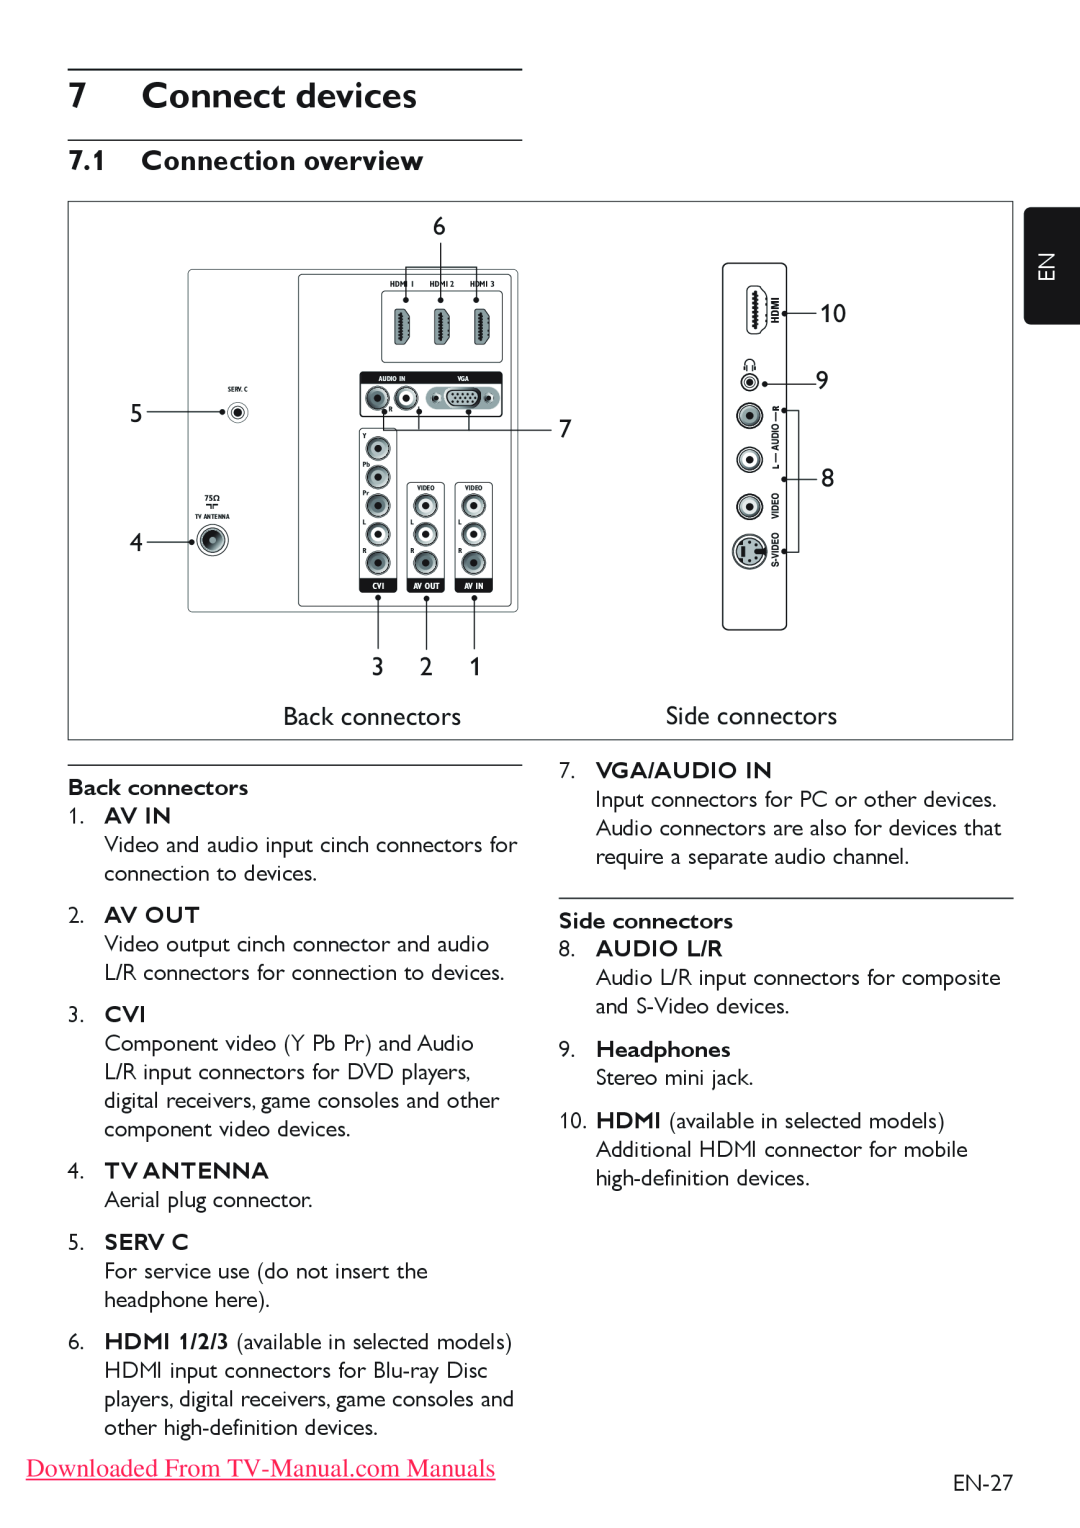 Philips 42PFL7603 Connect devices, 7.1Connection overview, Back connectors 1.AV IN, Av Out, 3.CVI, 7.VGA/AUDIO IN 